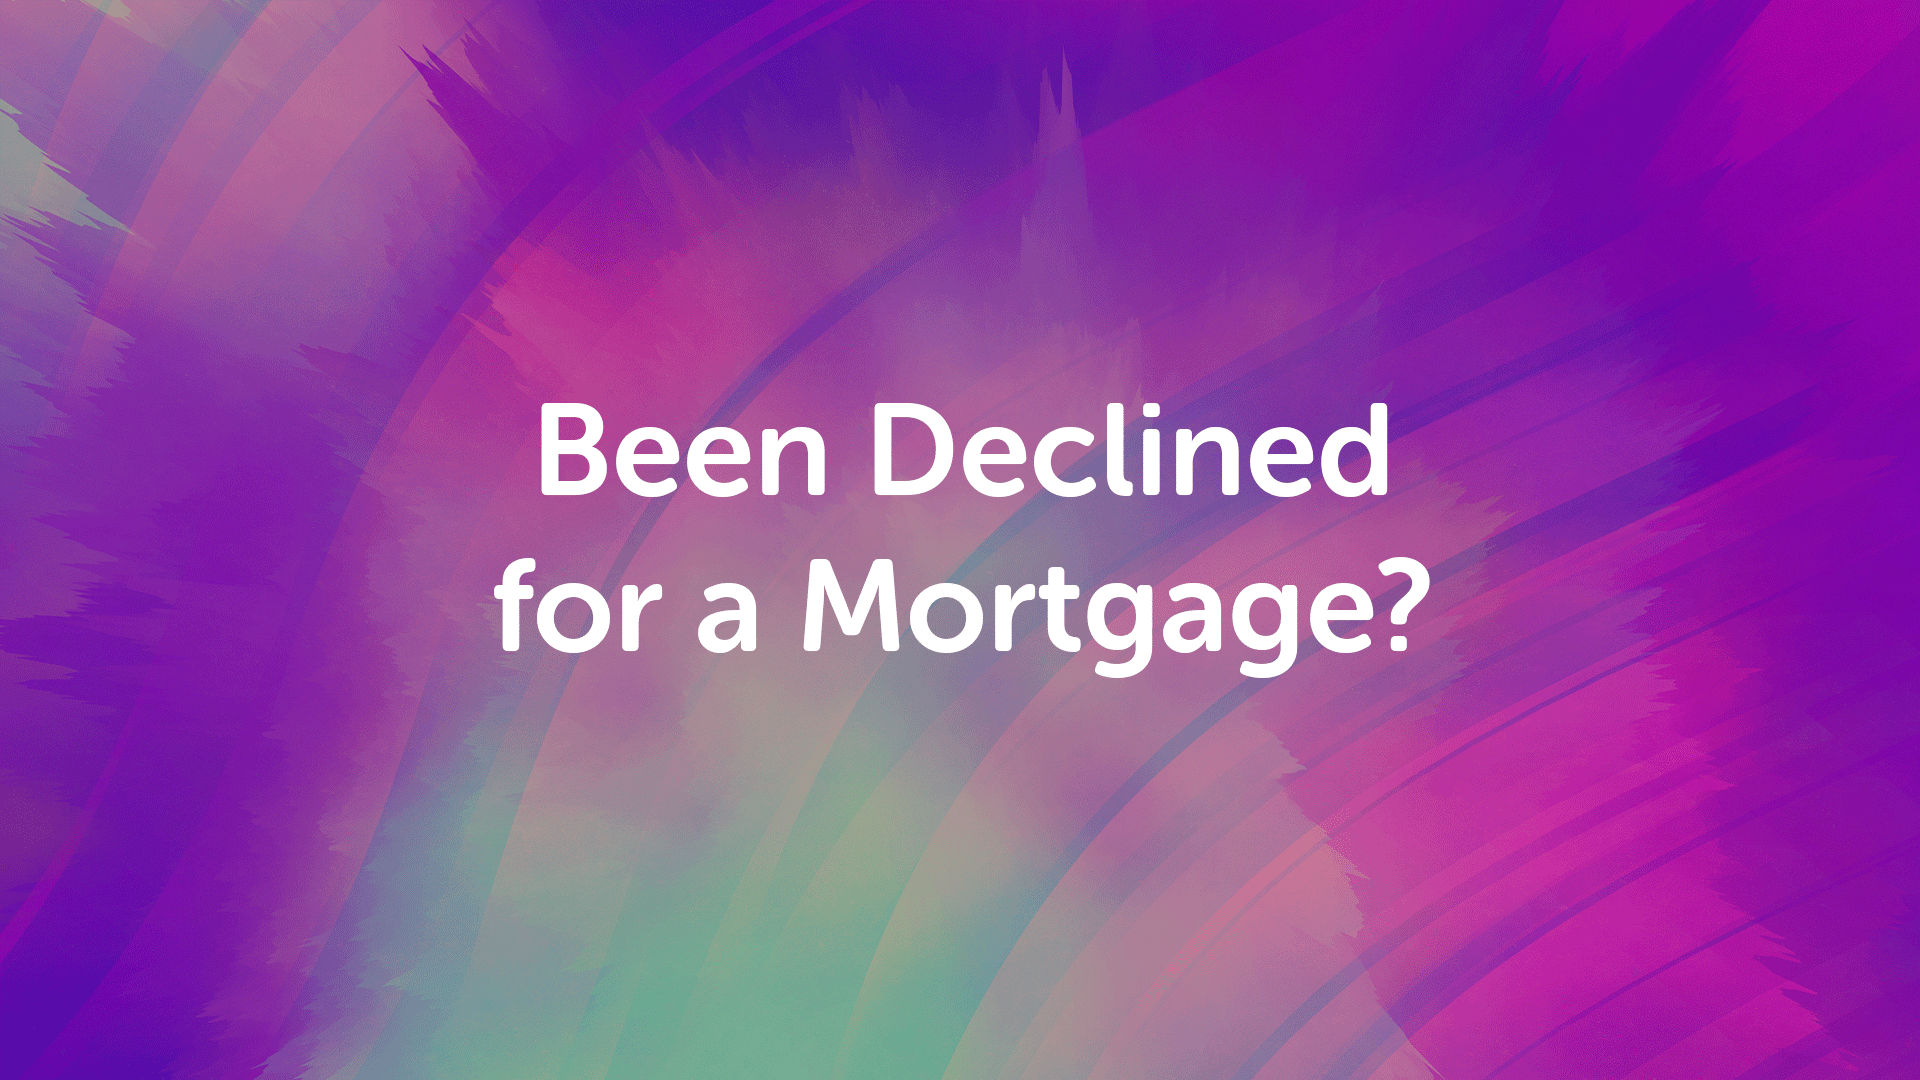 Declined for a Mortgage | Londonmoneyman